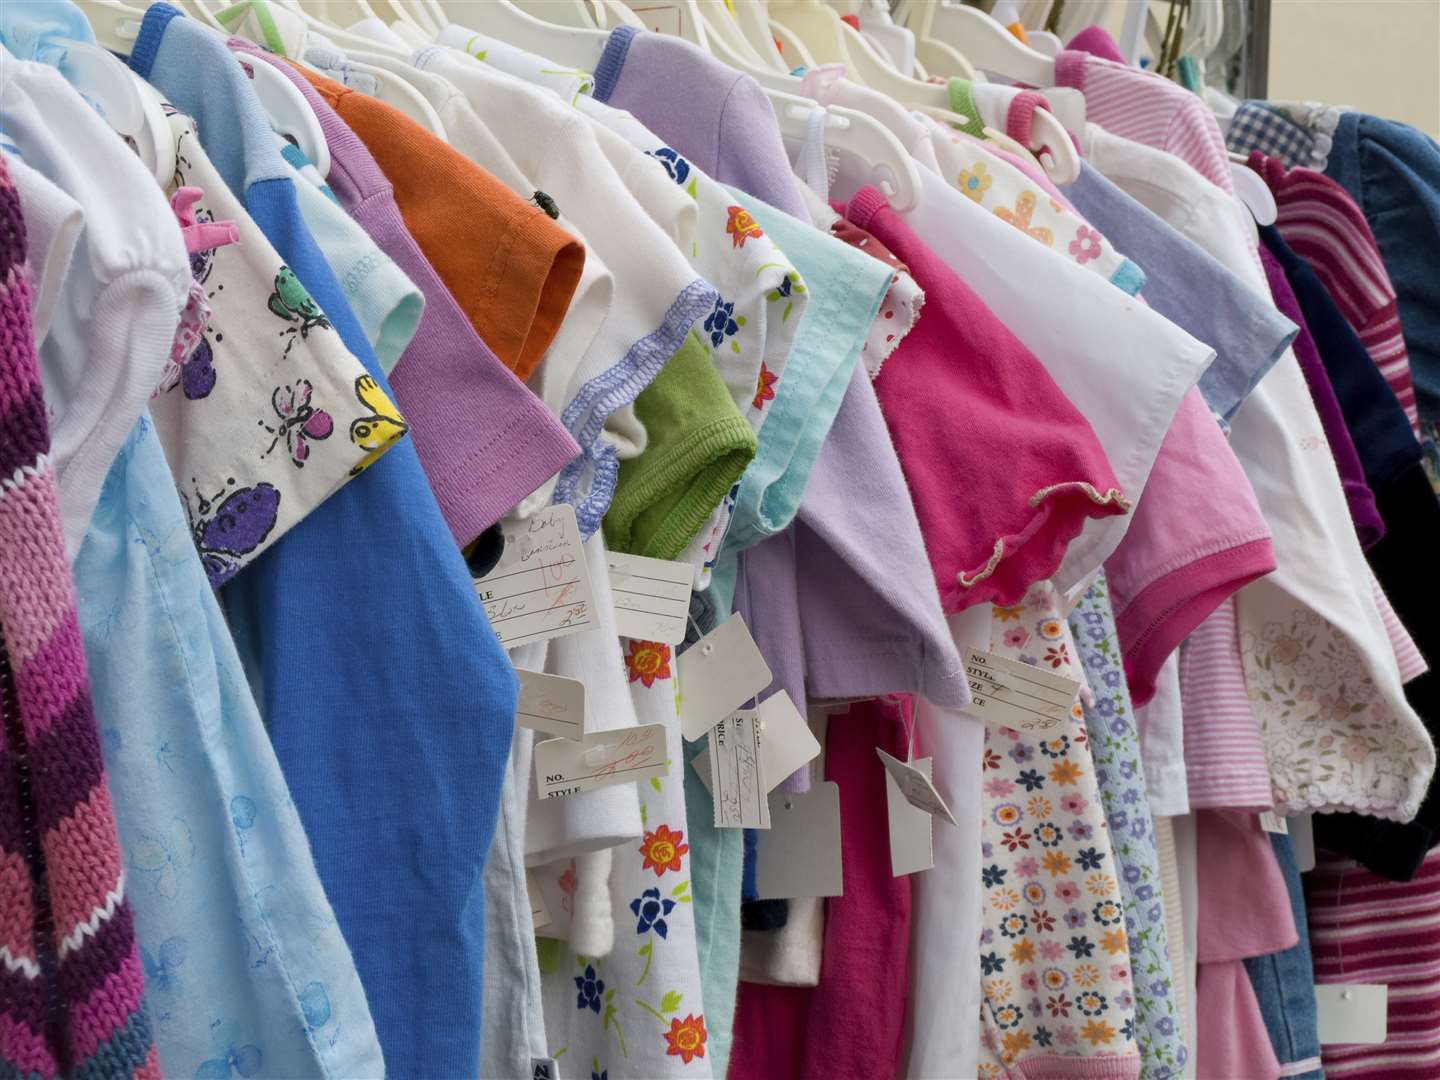 A fair in Thanet this weekend will offer parents some great bargains say organisers. Image: iStock.